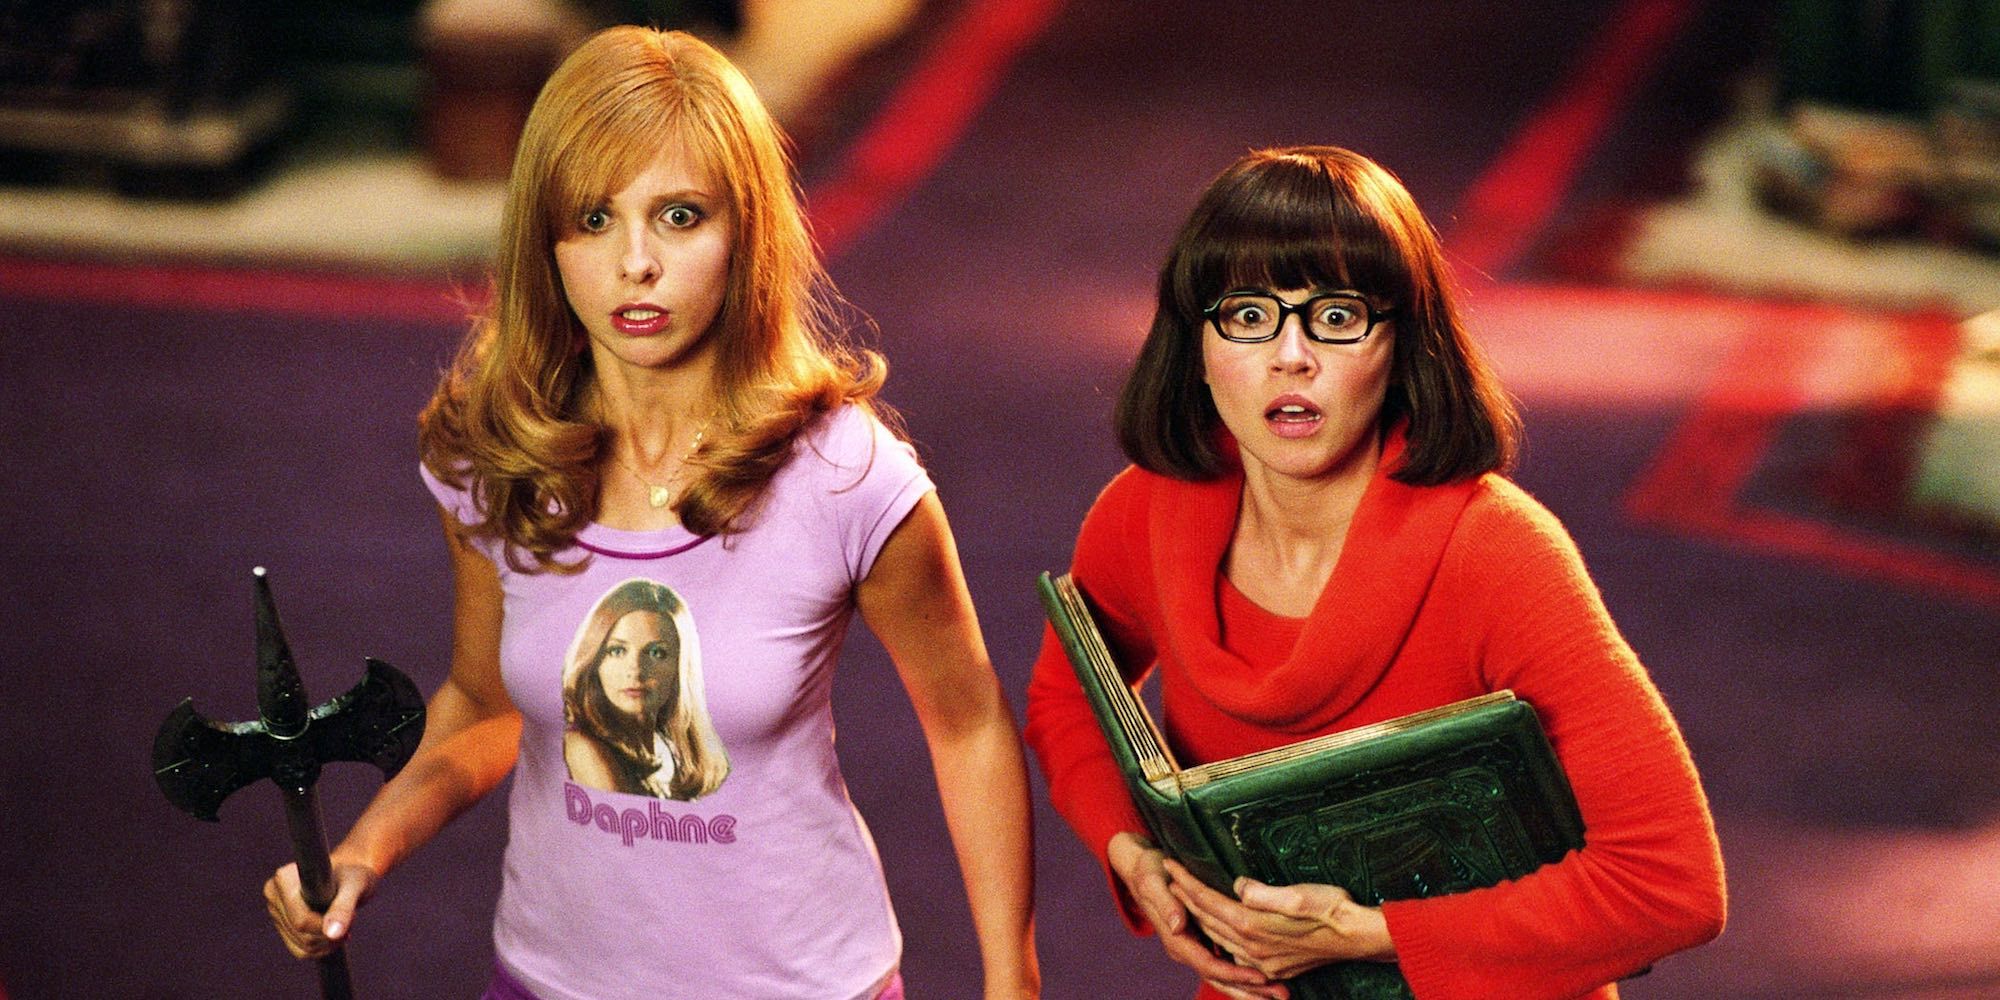 Sarah Michelle Gellar and Linda Cardellini as Daphne and Velma in Scooby-Doo